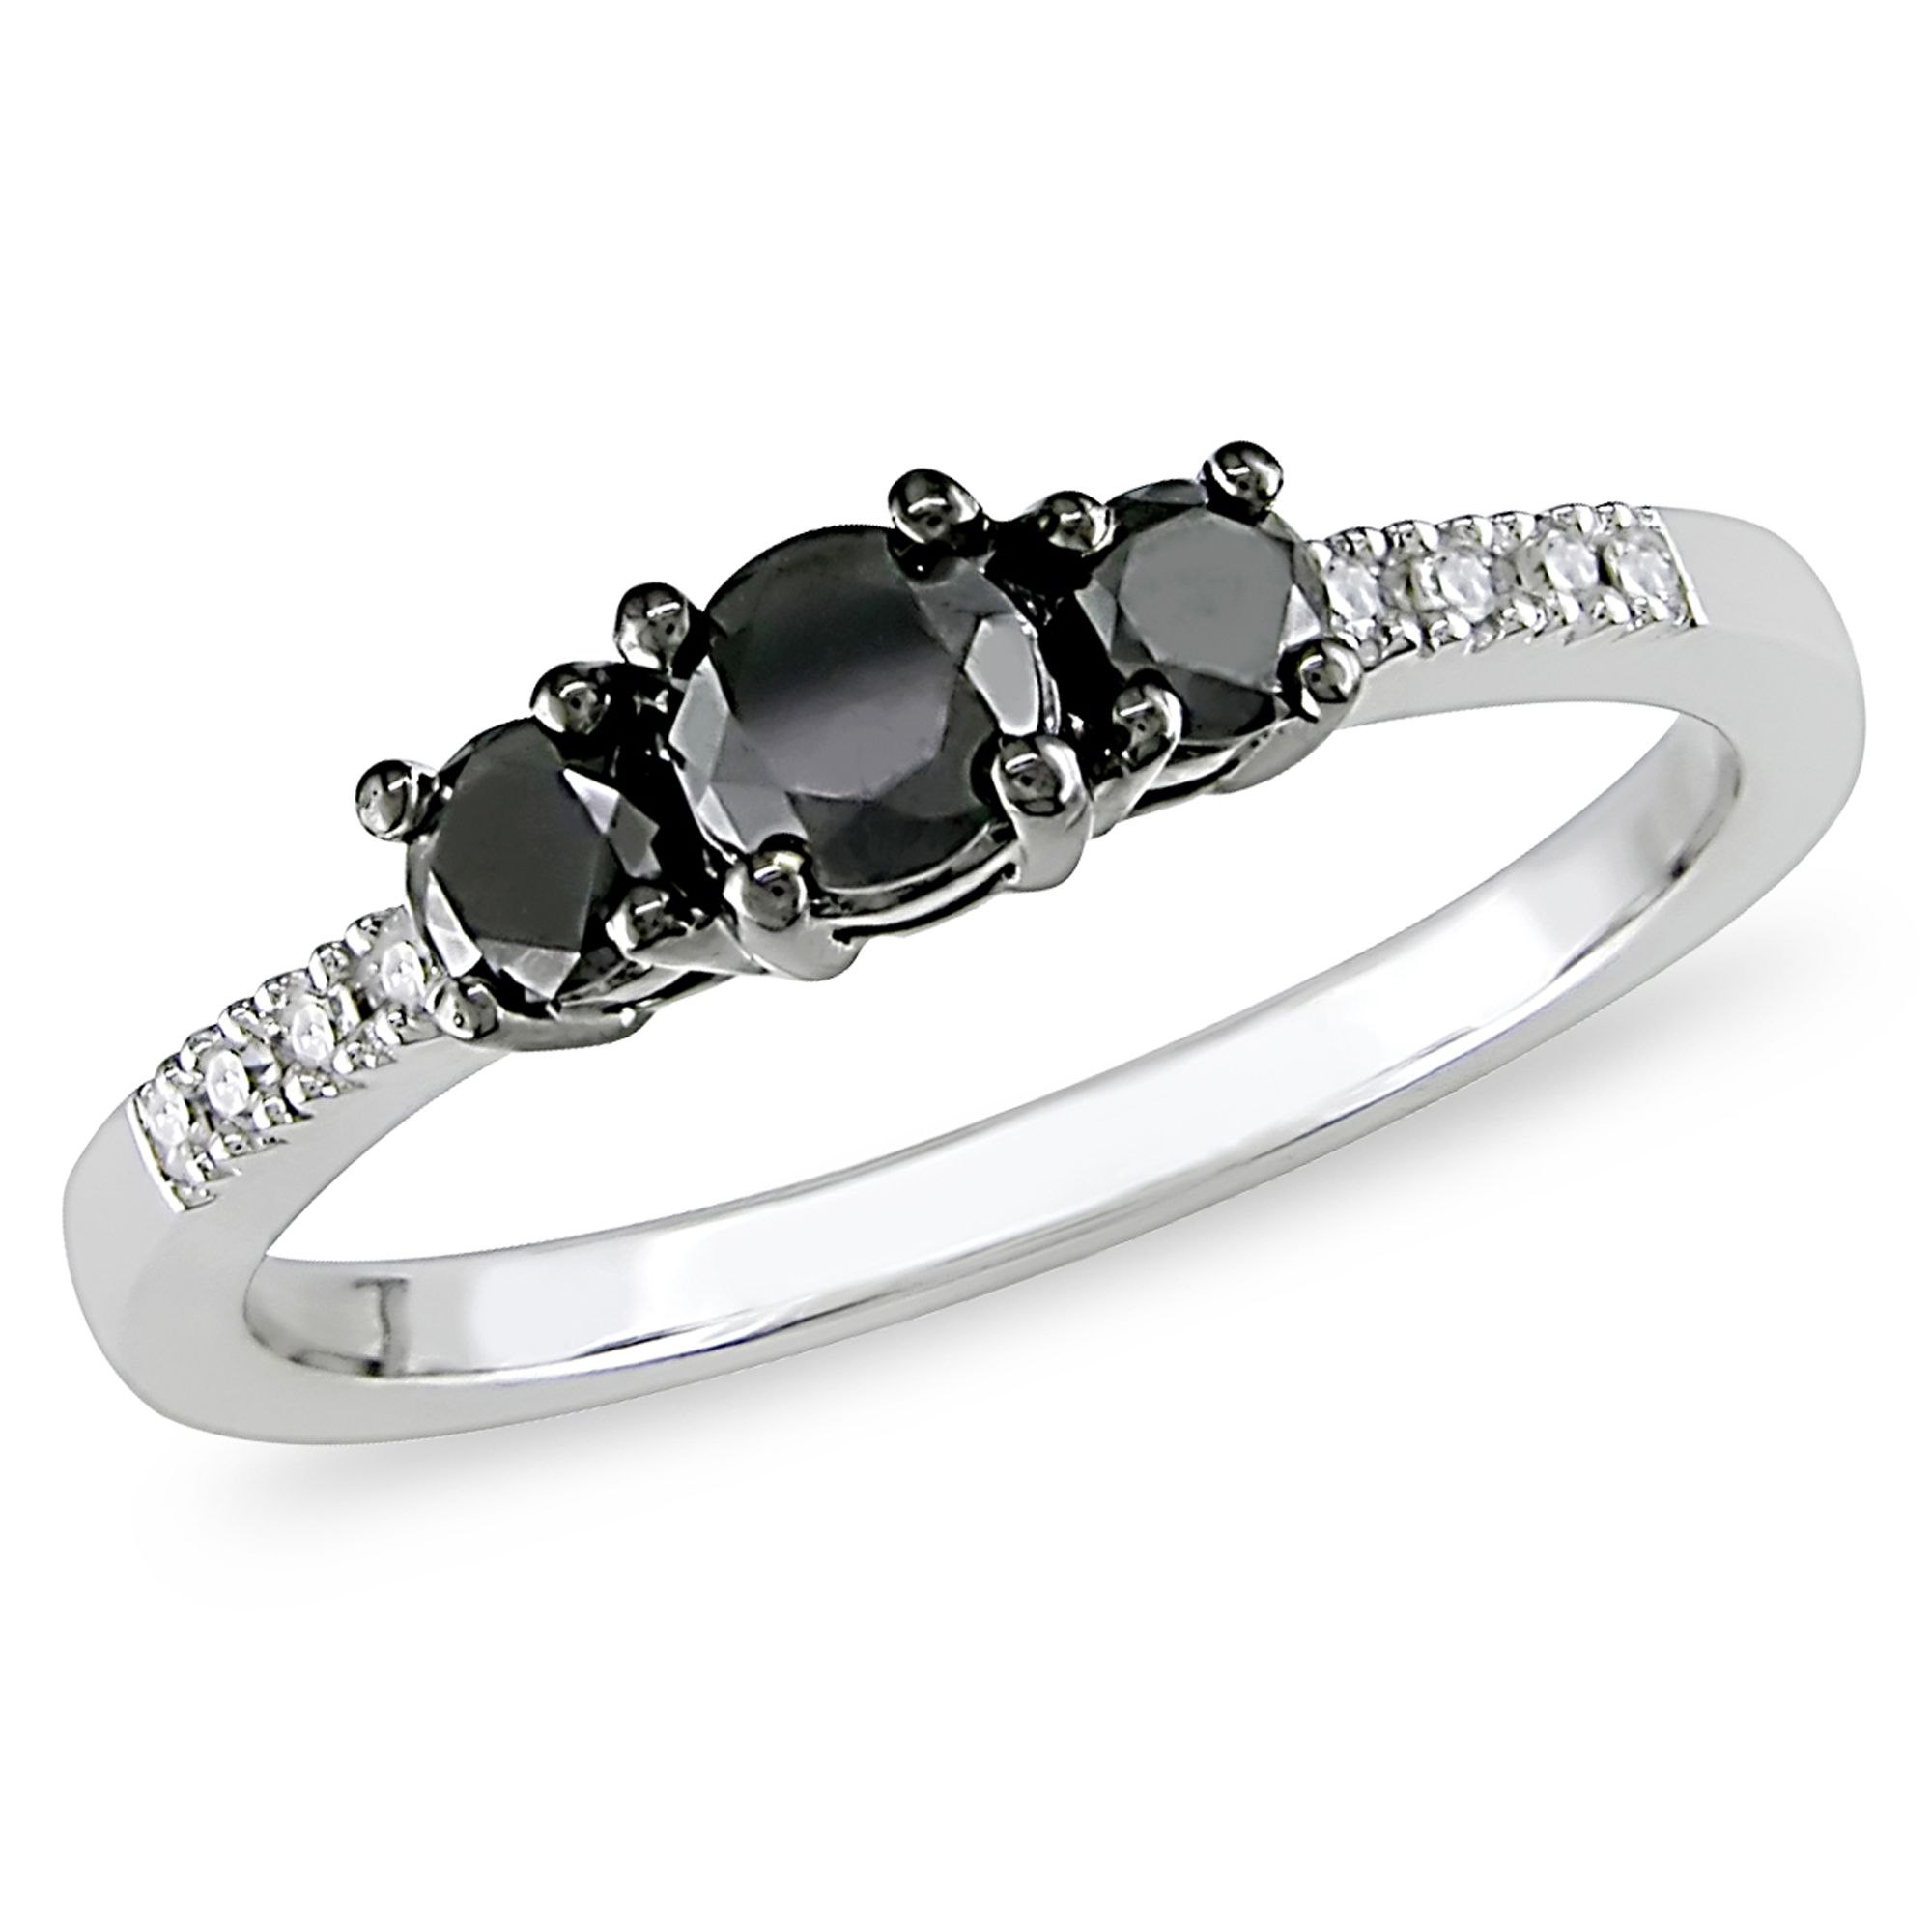 1/2 CTTW Black and White Diamond Ring in 10k White Gold